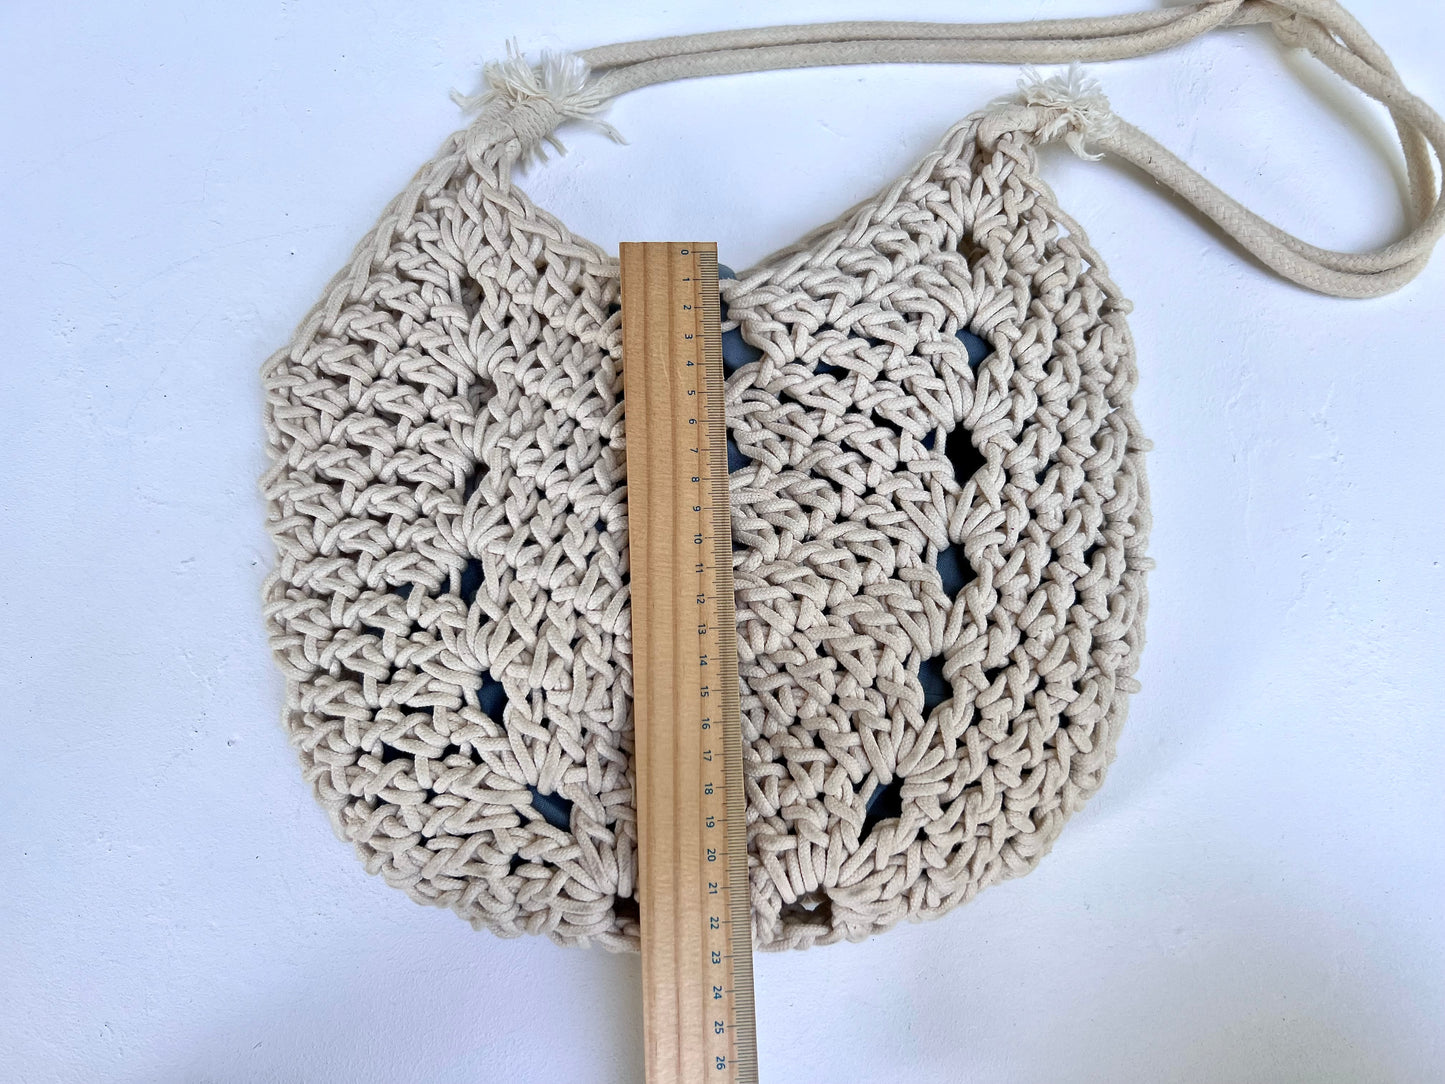 Crocheted boho natural rope purse with adjustable straps